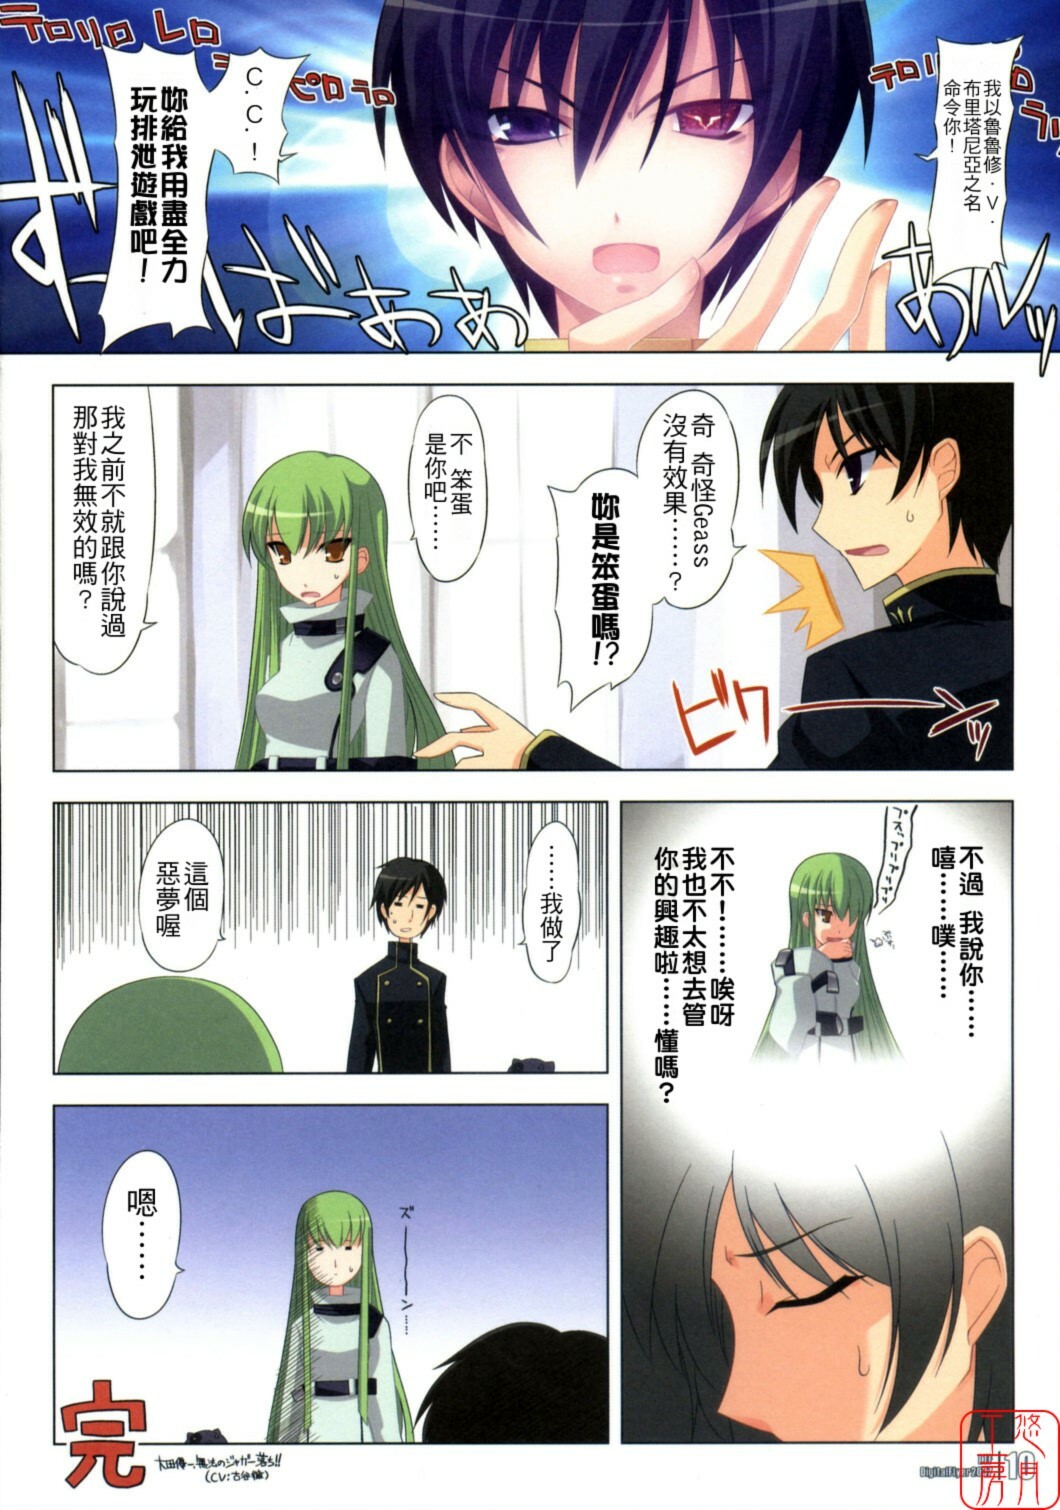 (SC34) [Digital Flyer (Oota Yuuichi)] LTF (Lelouch The Fullpower) (Code Geass: Lelouch of the Rebellion) [Chinese] [悠月工房] page 10 full